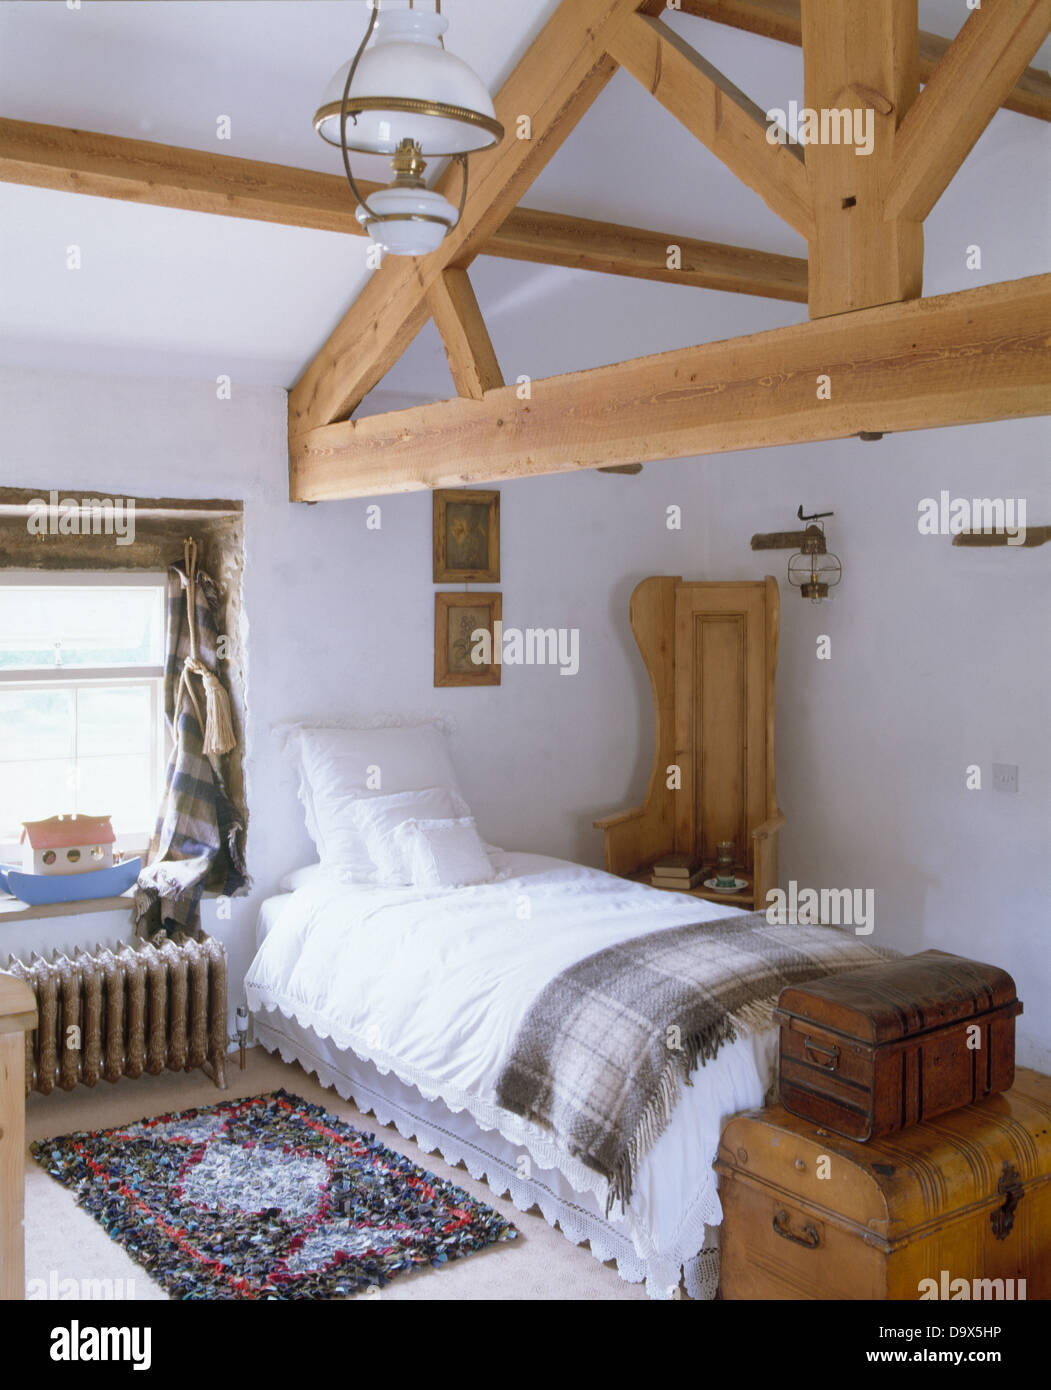 Wooden apex beams in country loft conversion bedroom with white bedlinen and plaid rug on single bed and rag rug on floor Stock Photo